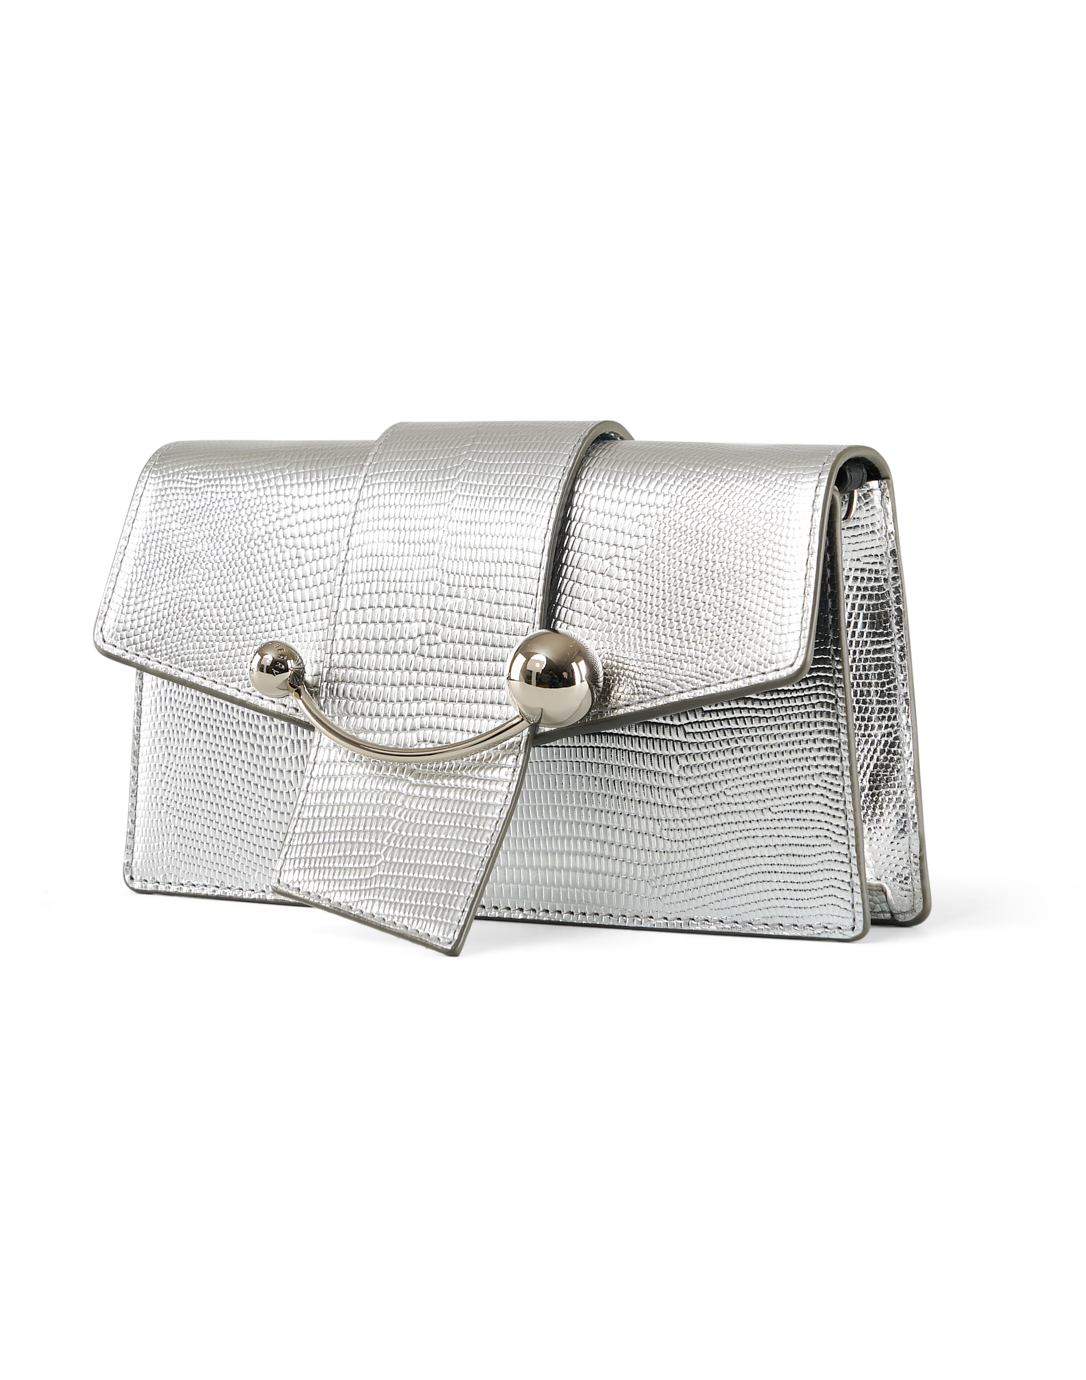 Strathberry Handbags, Purses & Wallets for Women